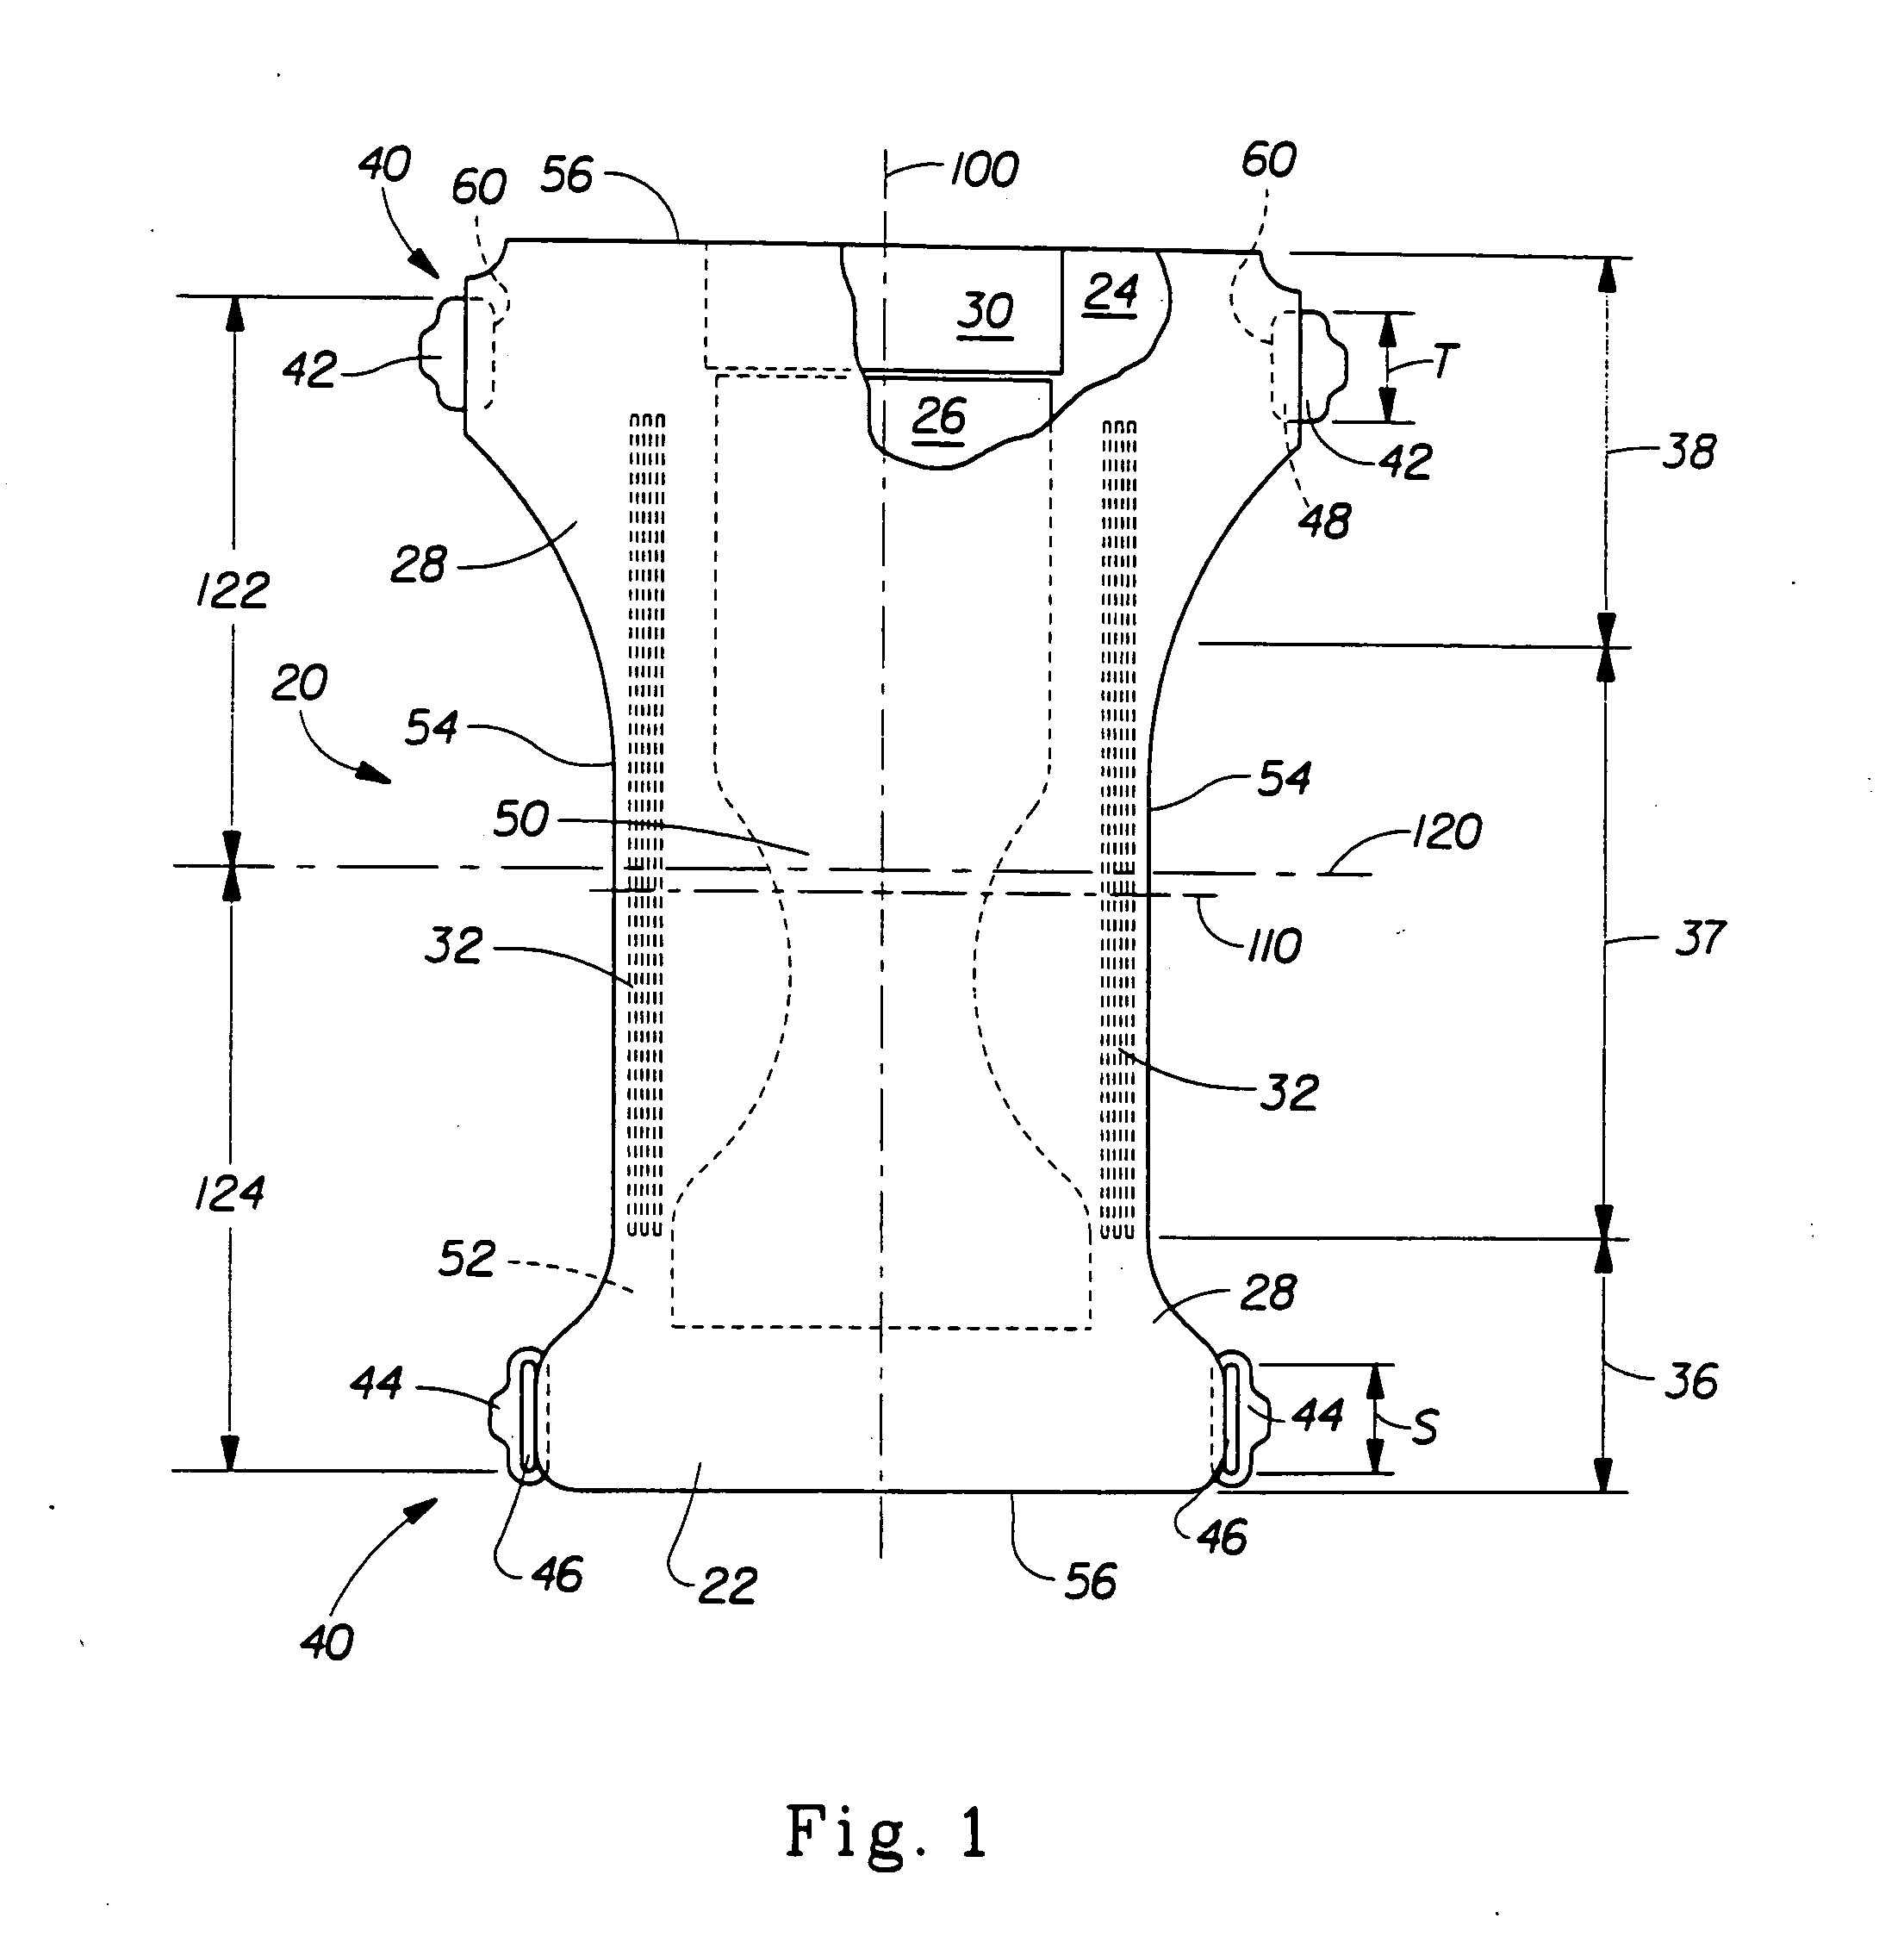 Method of dynamically pre-fastening a disposable absorbent article having a slot-and-tab-fastening system